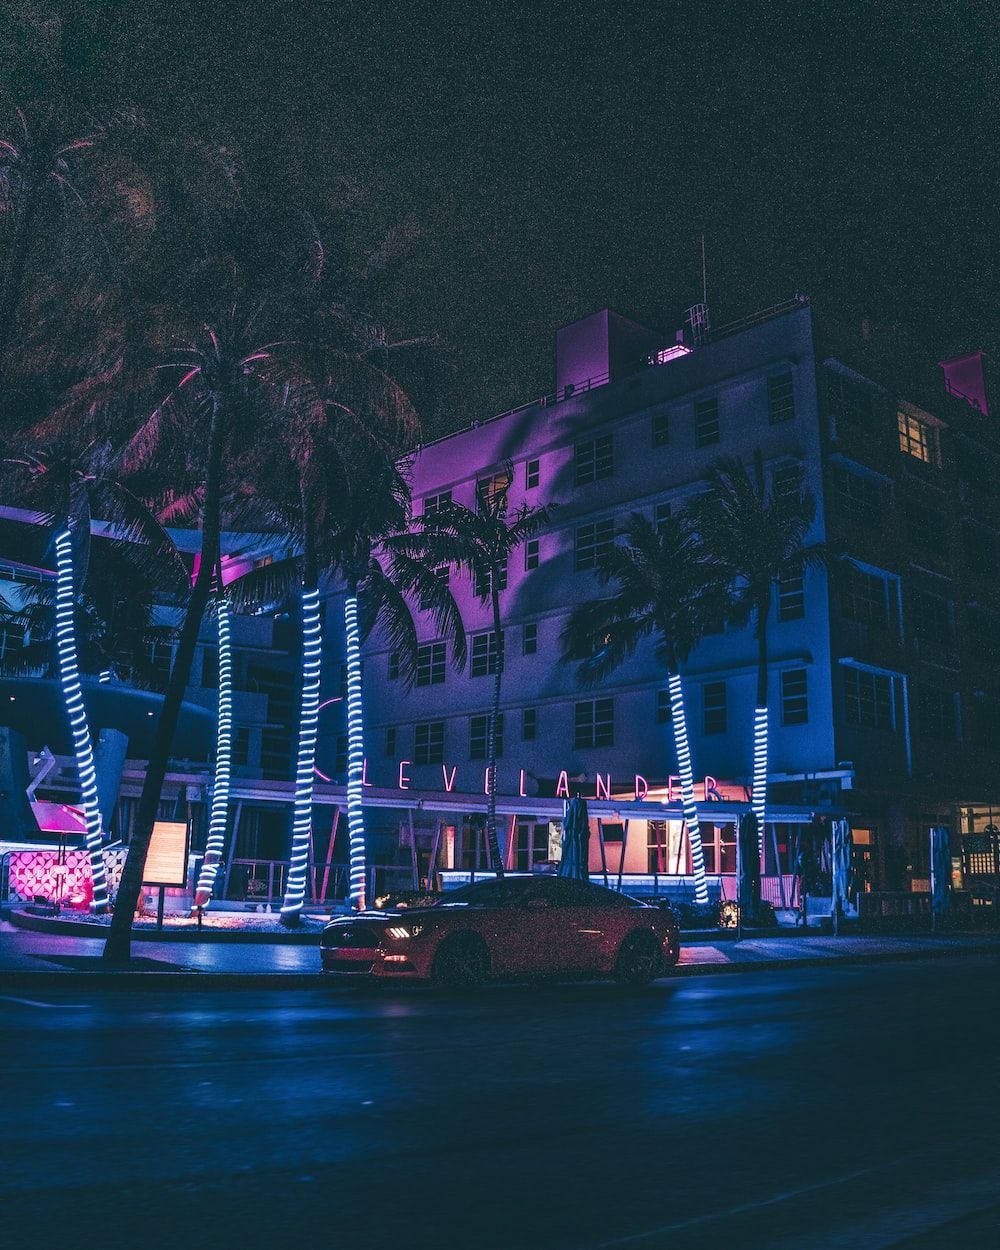 A city street at night with neon lights on the buildings and palm trees. - Miami